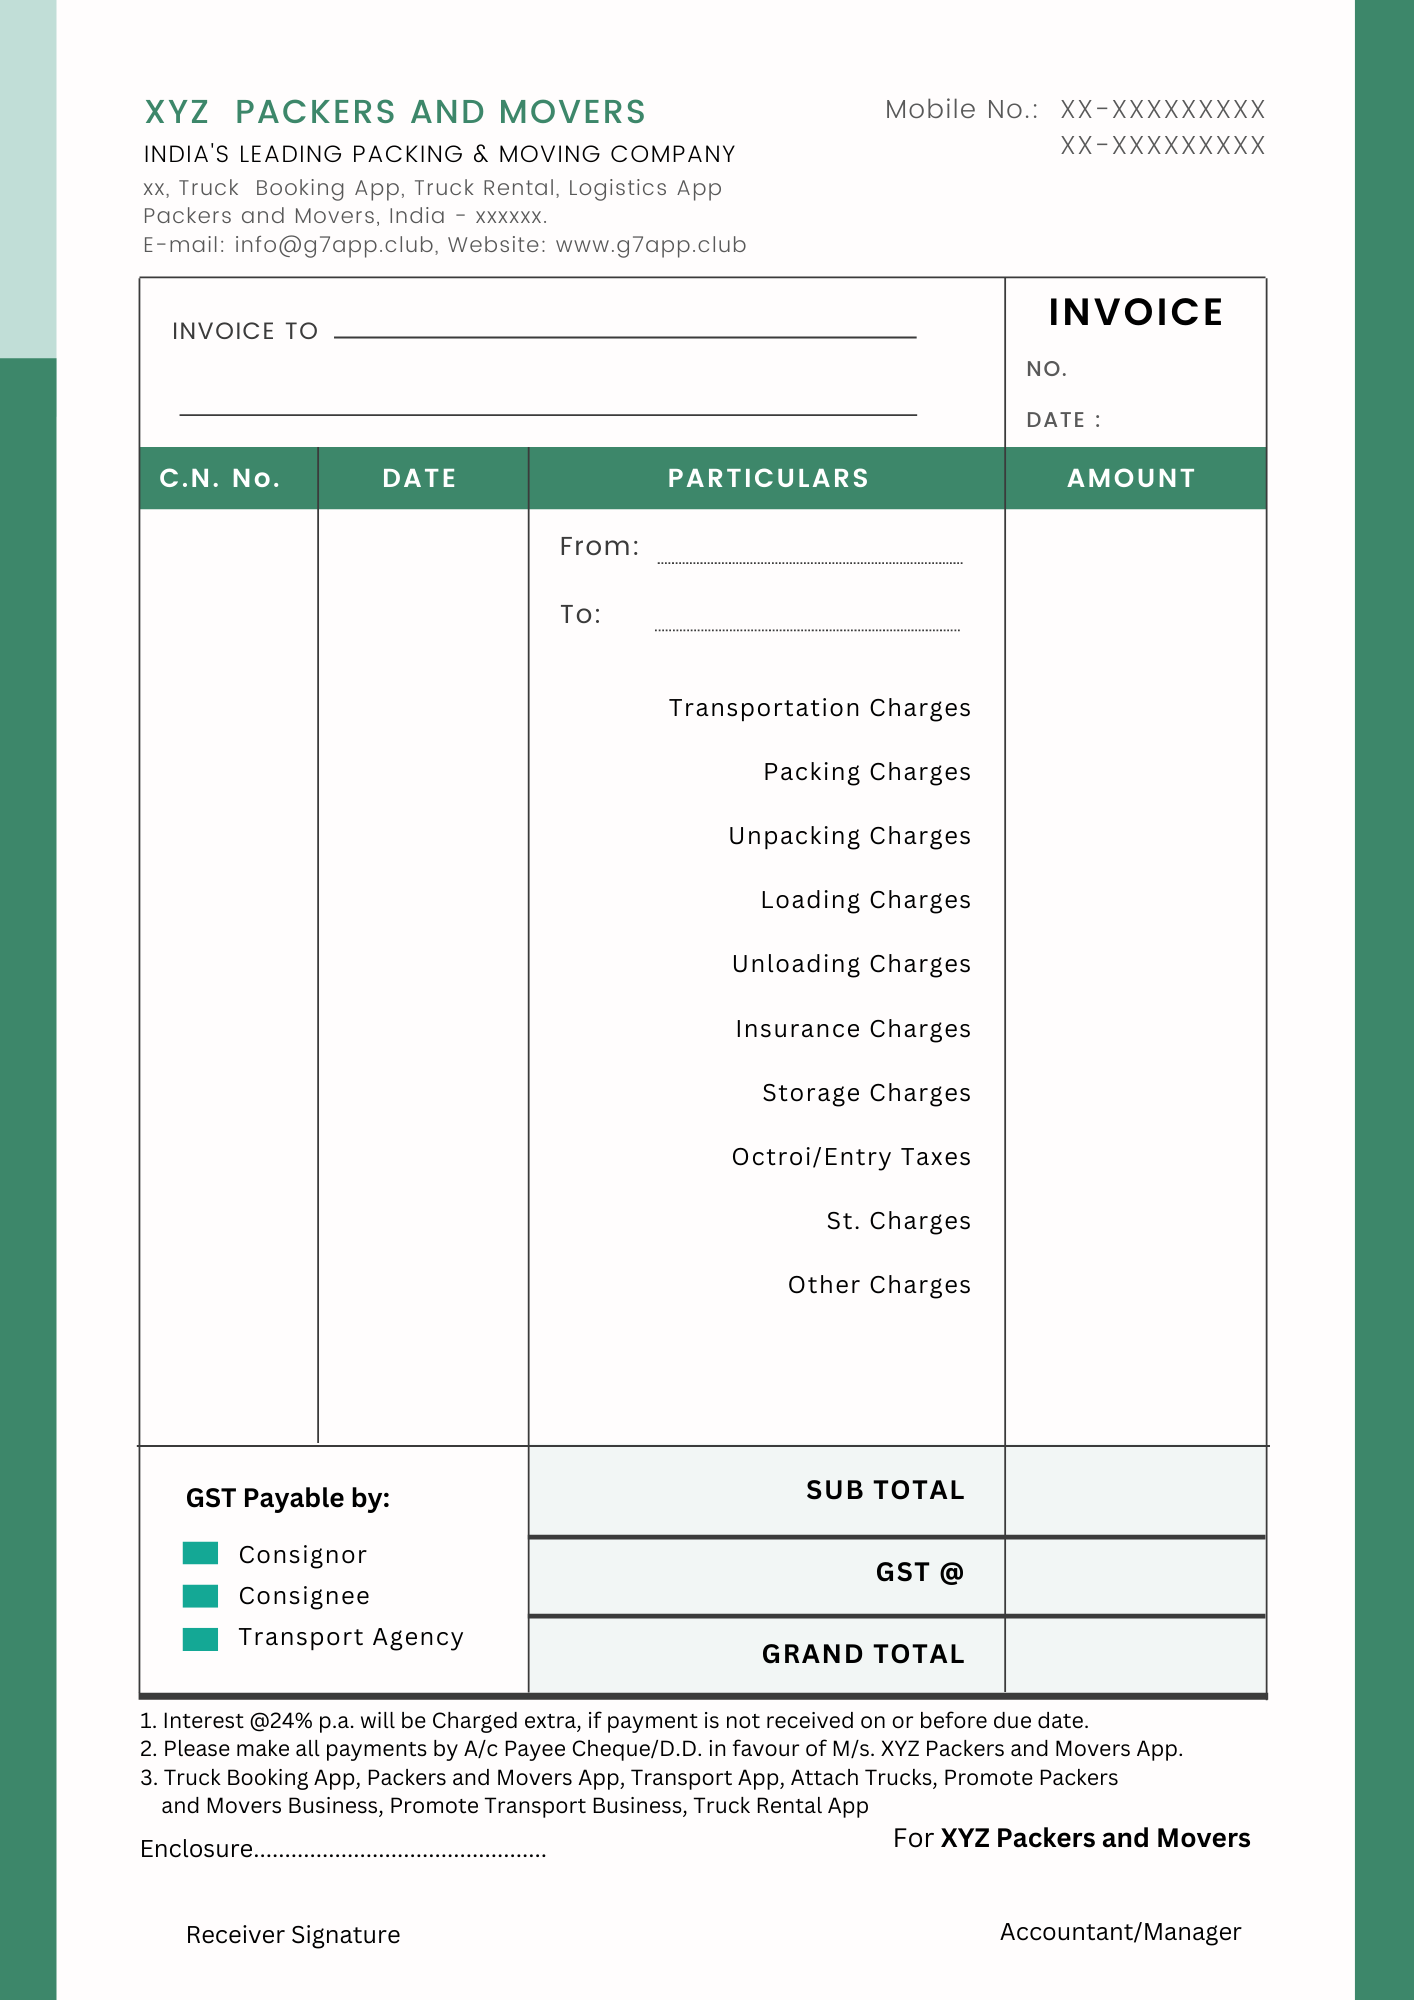 'png Format of Packers and Movers Invoice and Bill'